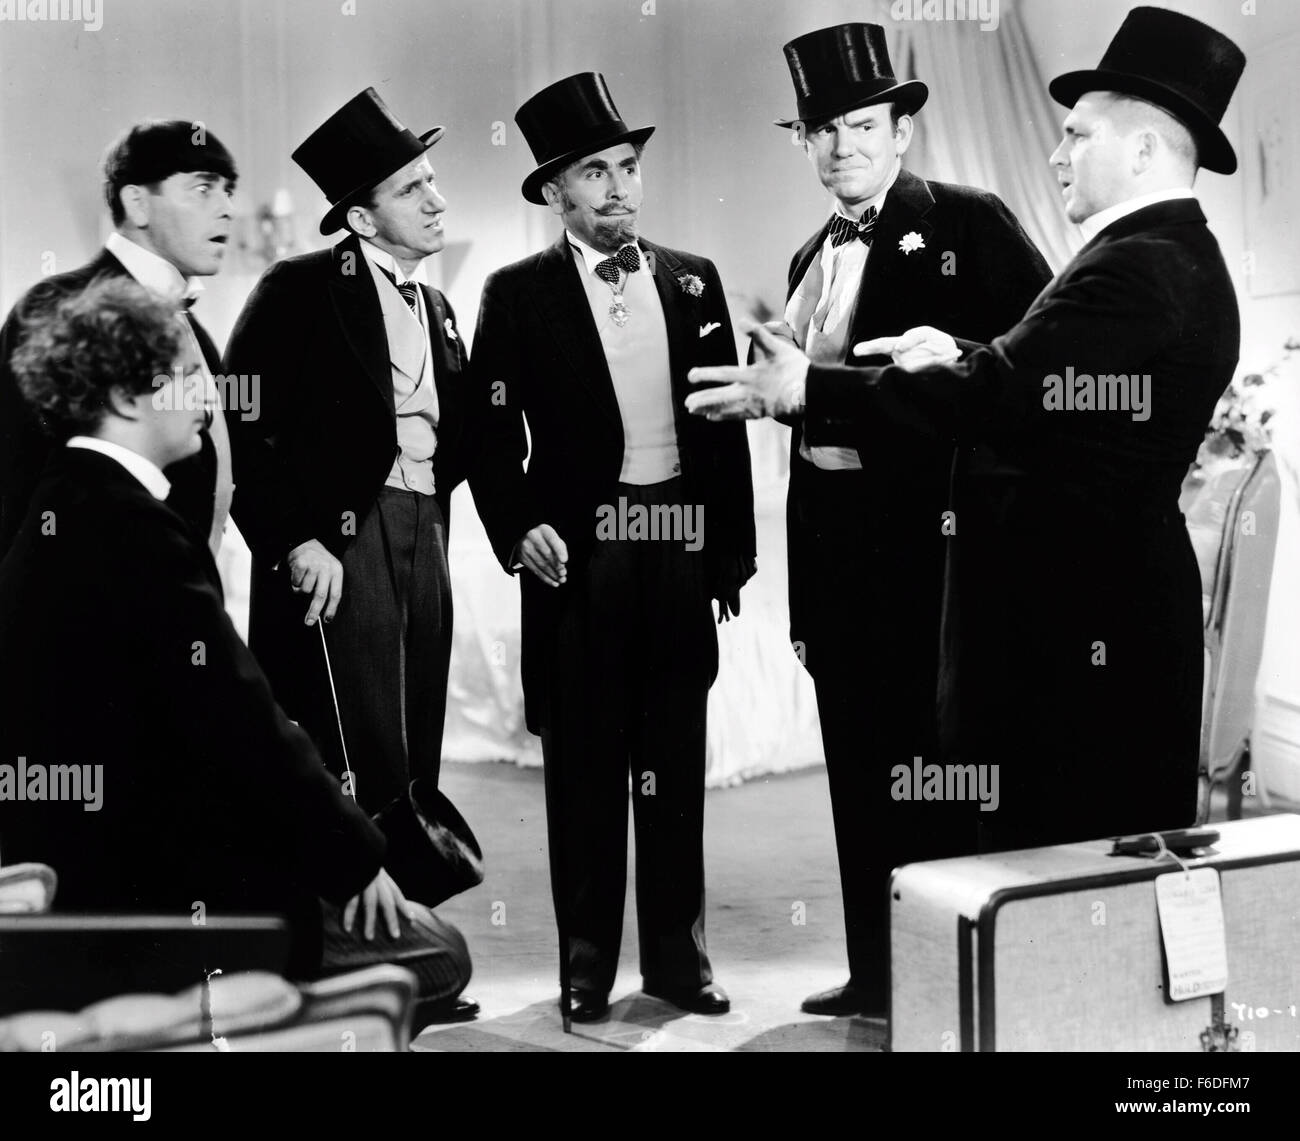 RELEASE DATE: October 20, 1933. MOVIE TITLE: Meet the Baron. STUDIO: Metro-Goldwyn-Mayer (MGM). PLOT: . PICTURED: LARRY FINE as Janitor, MOE HOWARD as Janitor, JIMMY DURANTE as Joe McGoo, JACK PEARL as Julius/Baron Munchausen, TED HEALY as Head Janitor and CURLY HOWARD as Janitor. Stock Photo